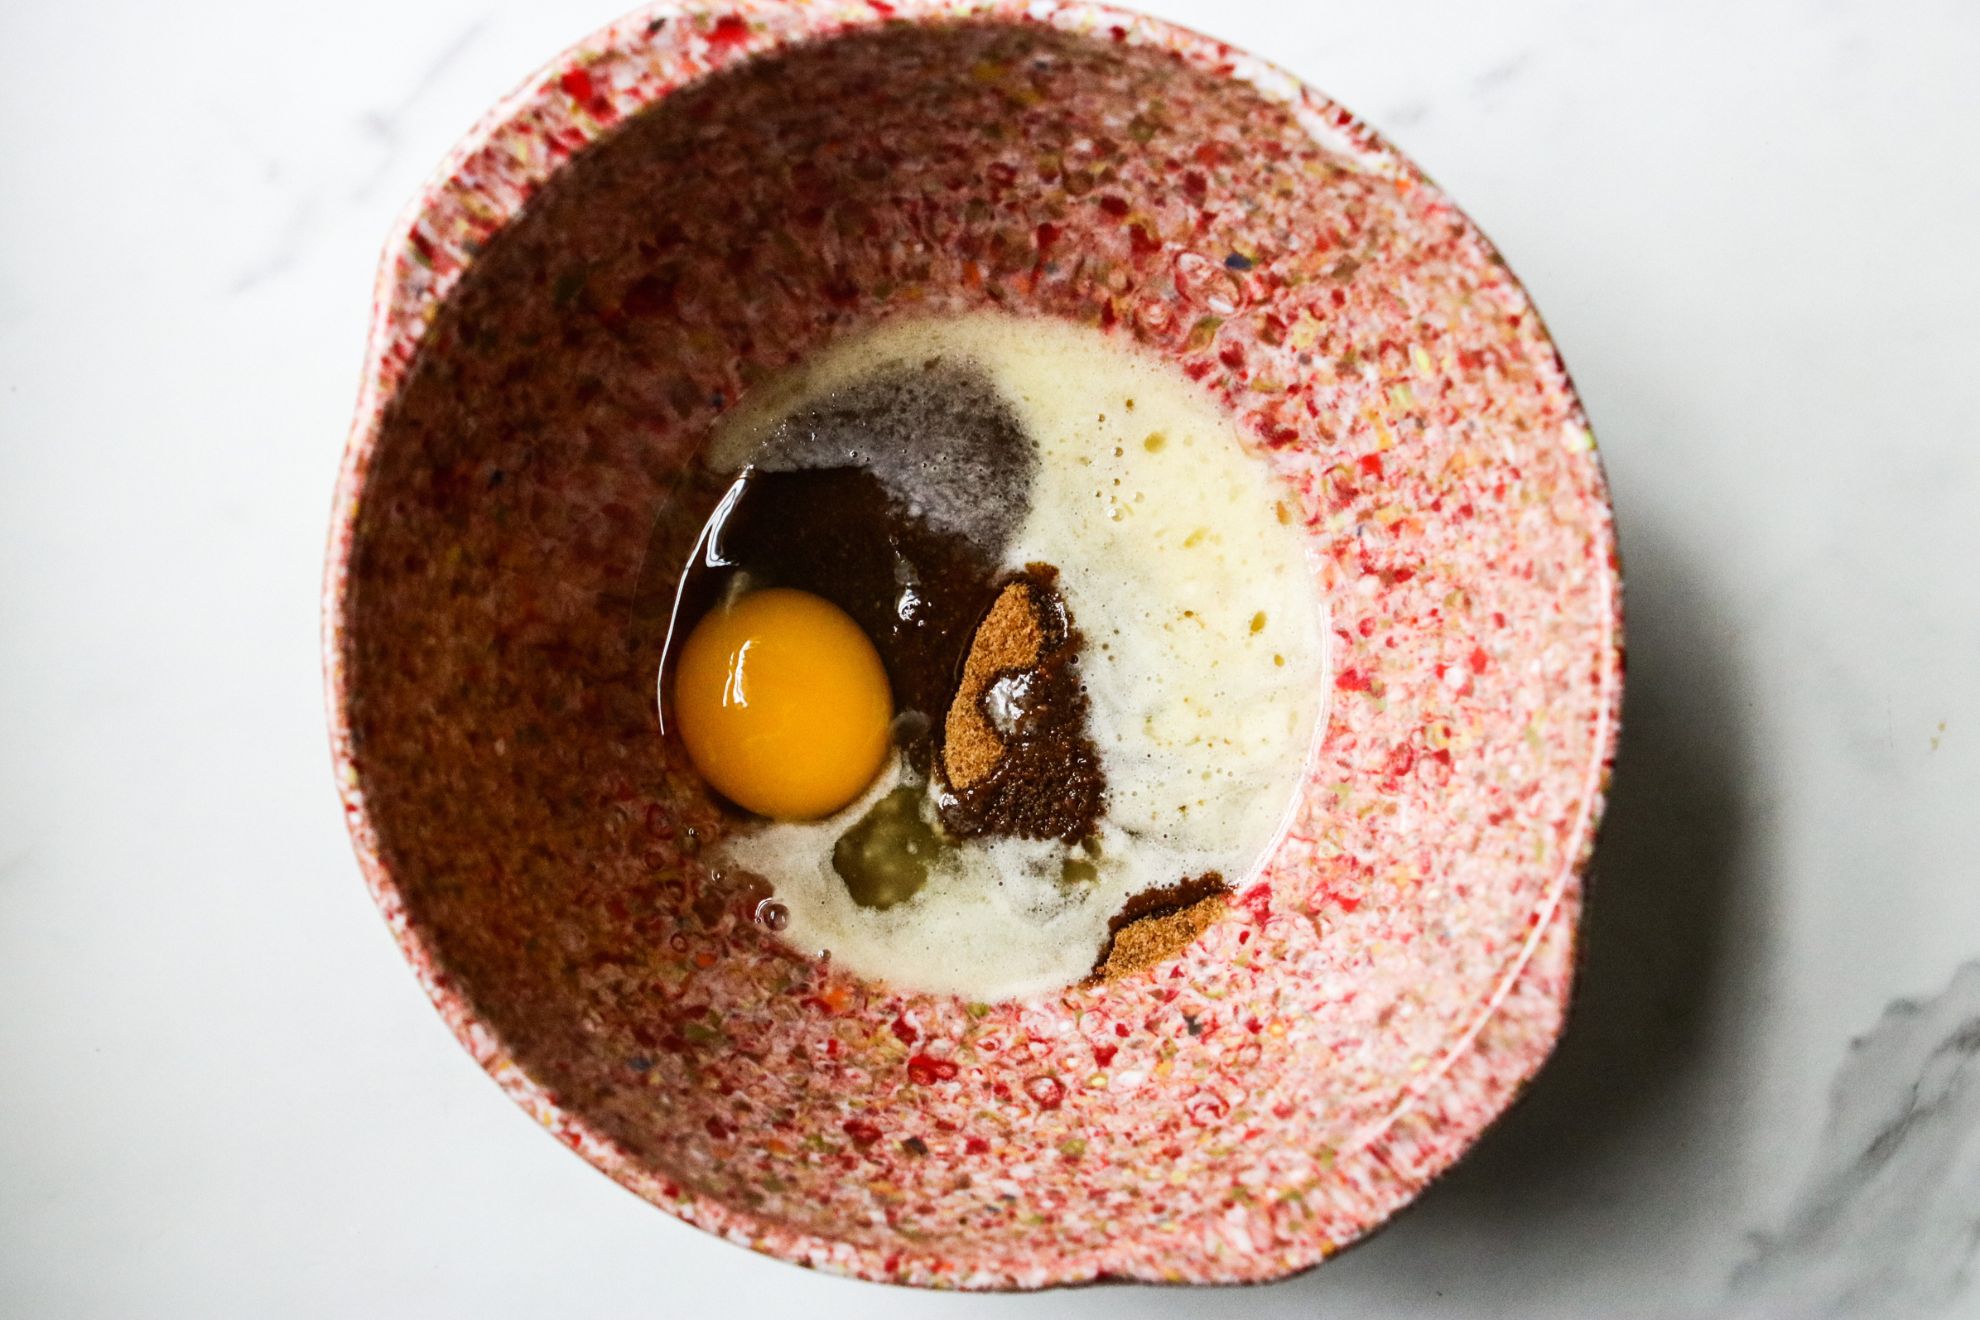 This is an overhead horizontal image of a pink speckled bowl on a white marble counter. In the bowl are wet ingredients including butter, coconut sugar, and an egg.